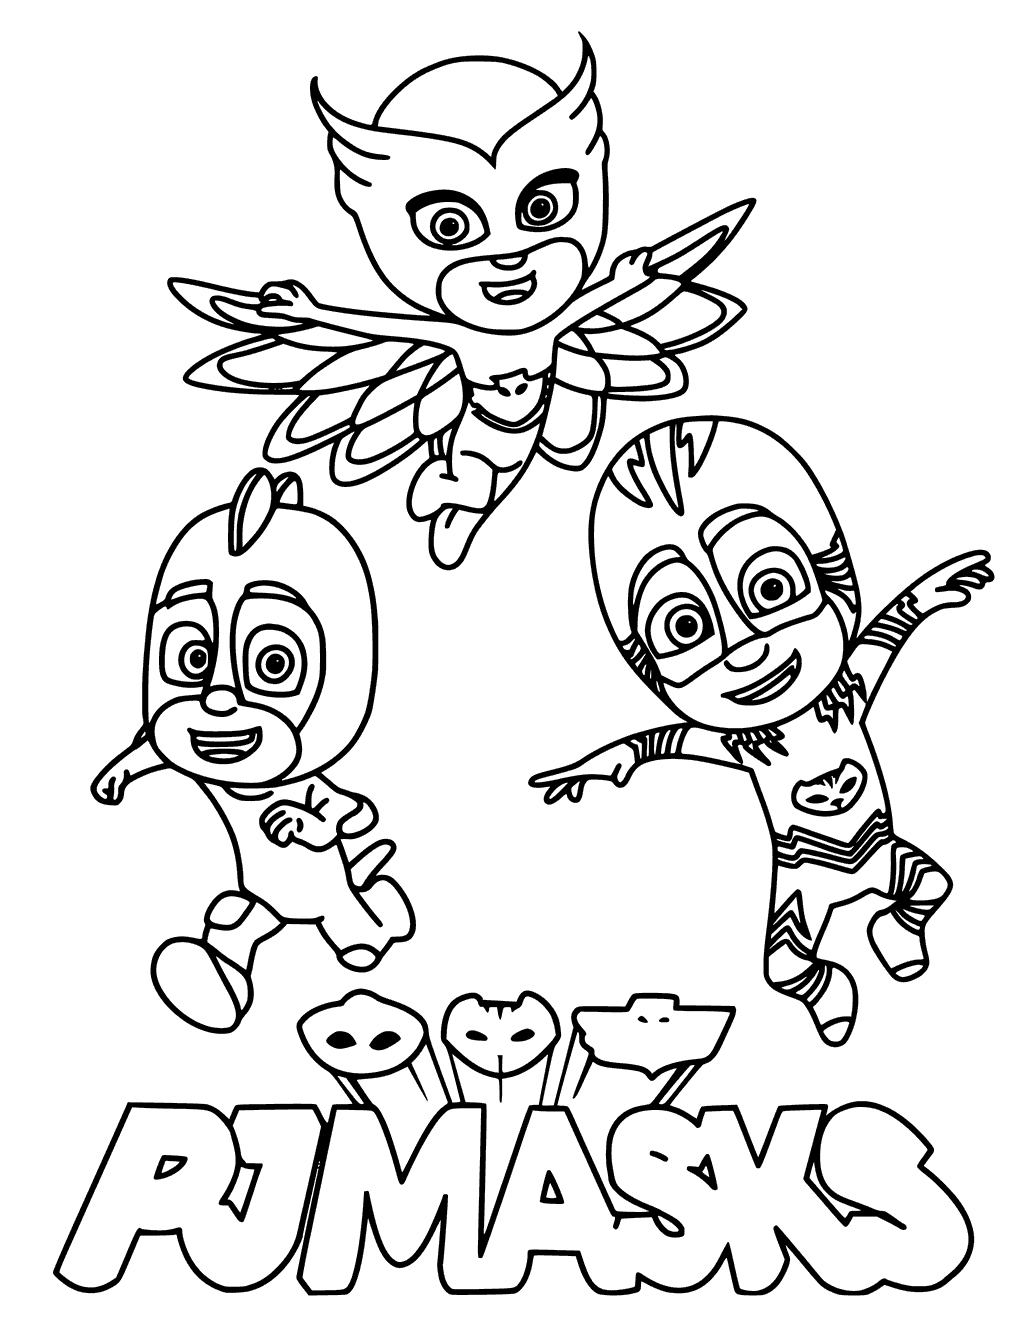 printable-pj-mask-coloring-pages